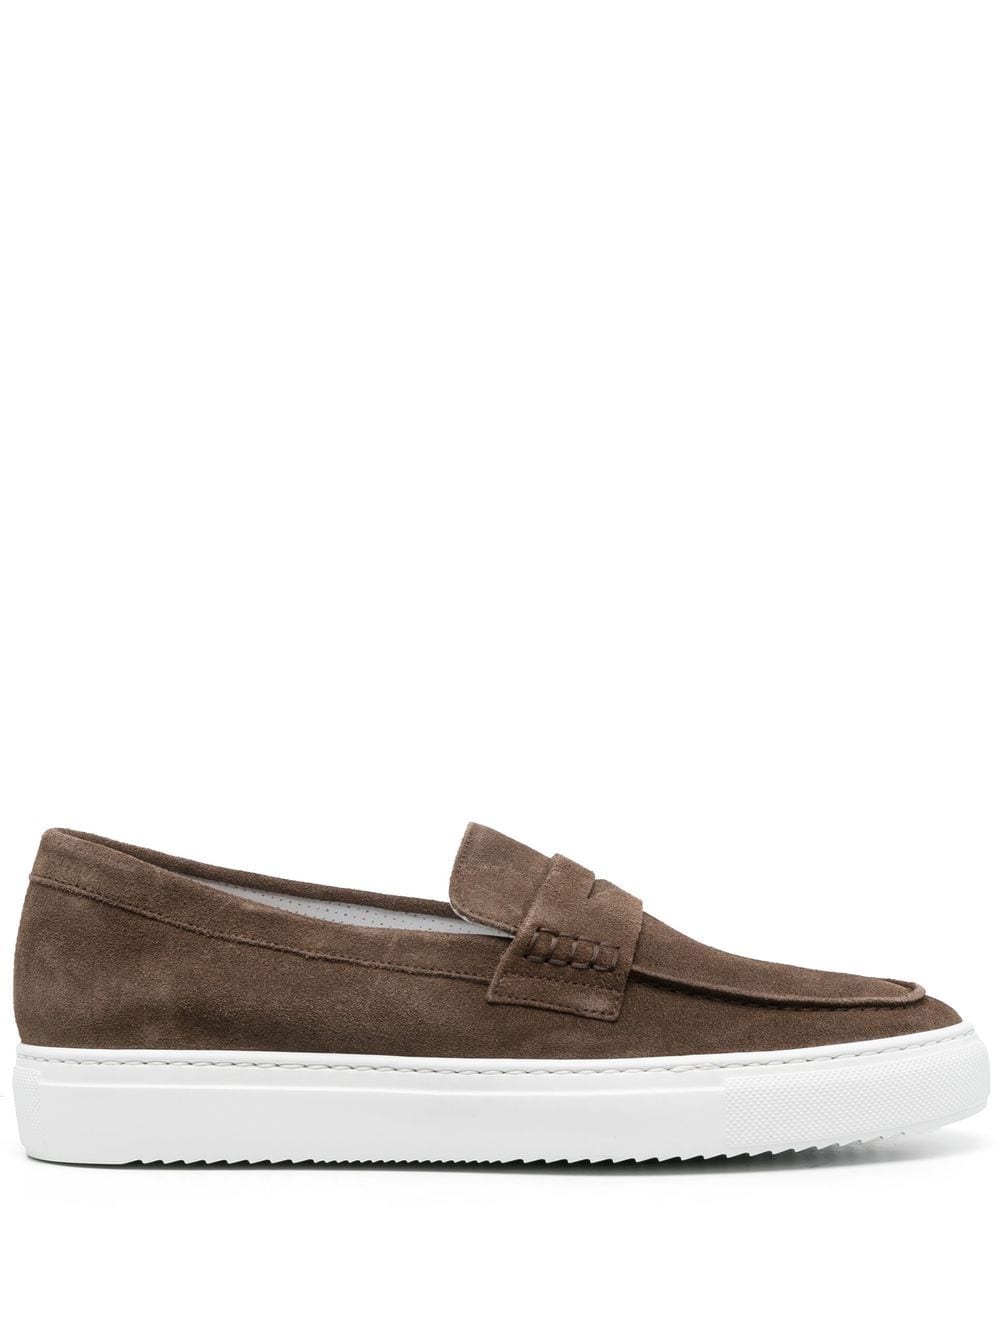 Doucal's almond toe suede loafers - Brown von Doucal's